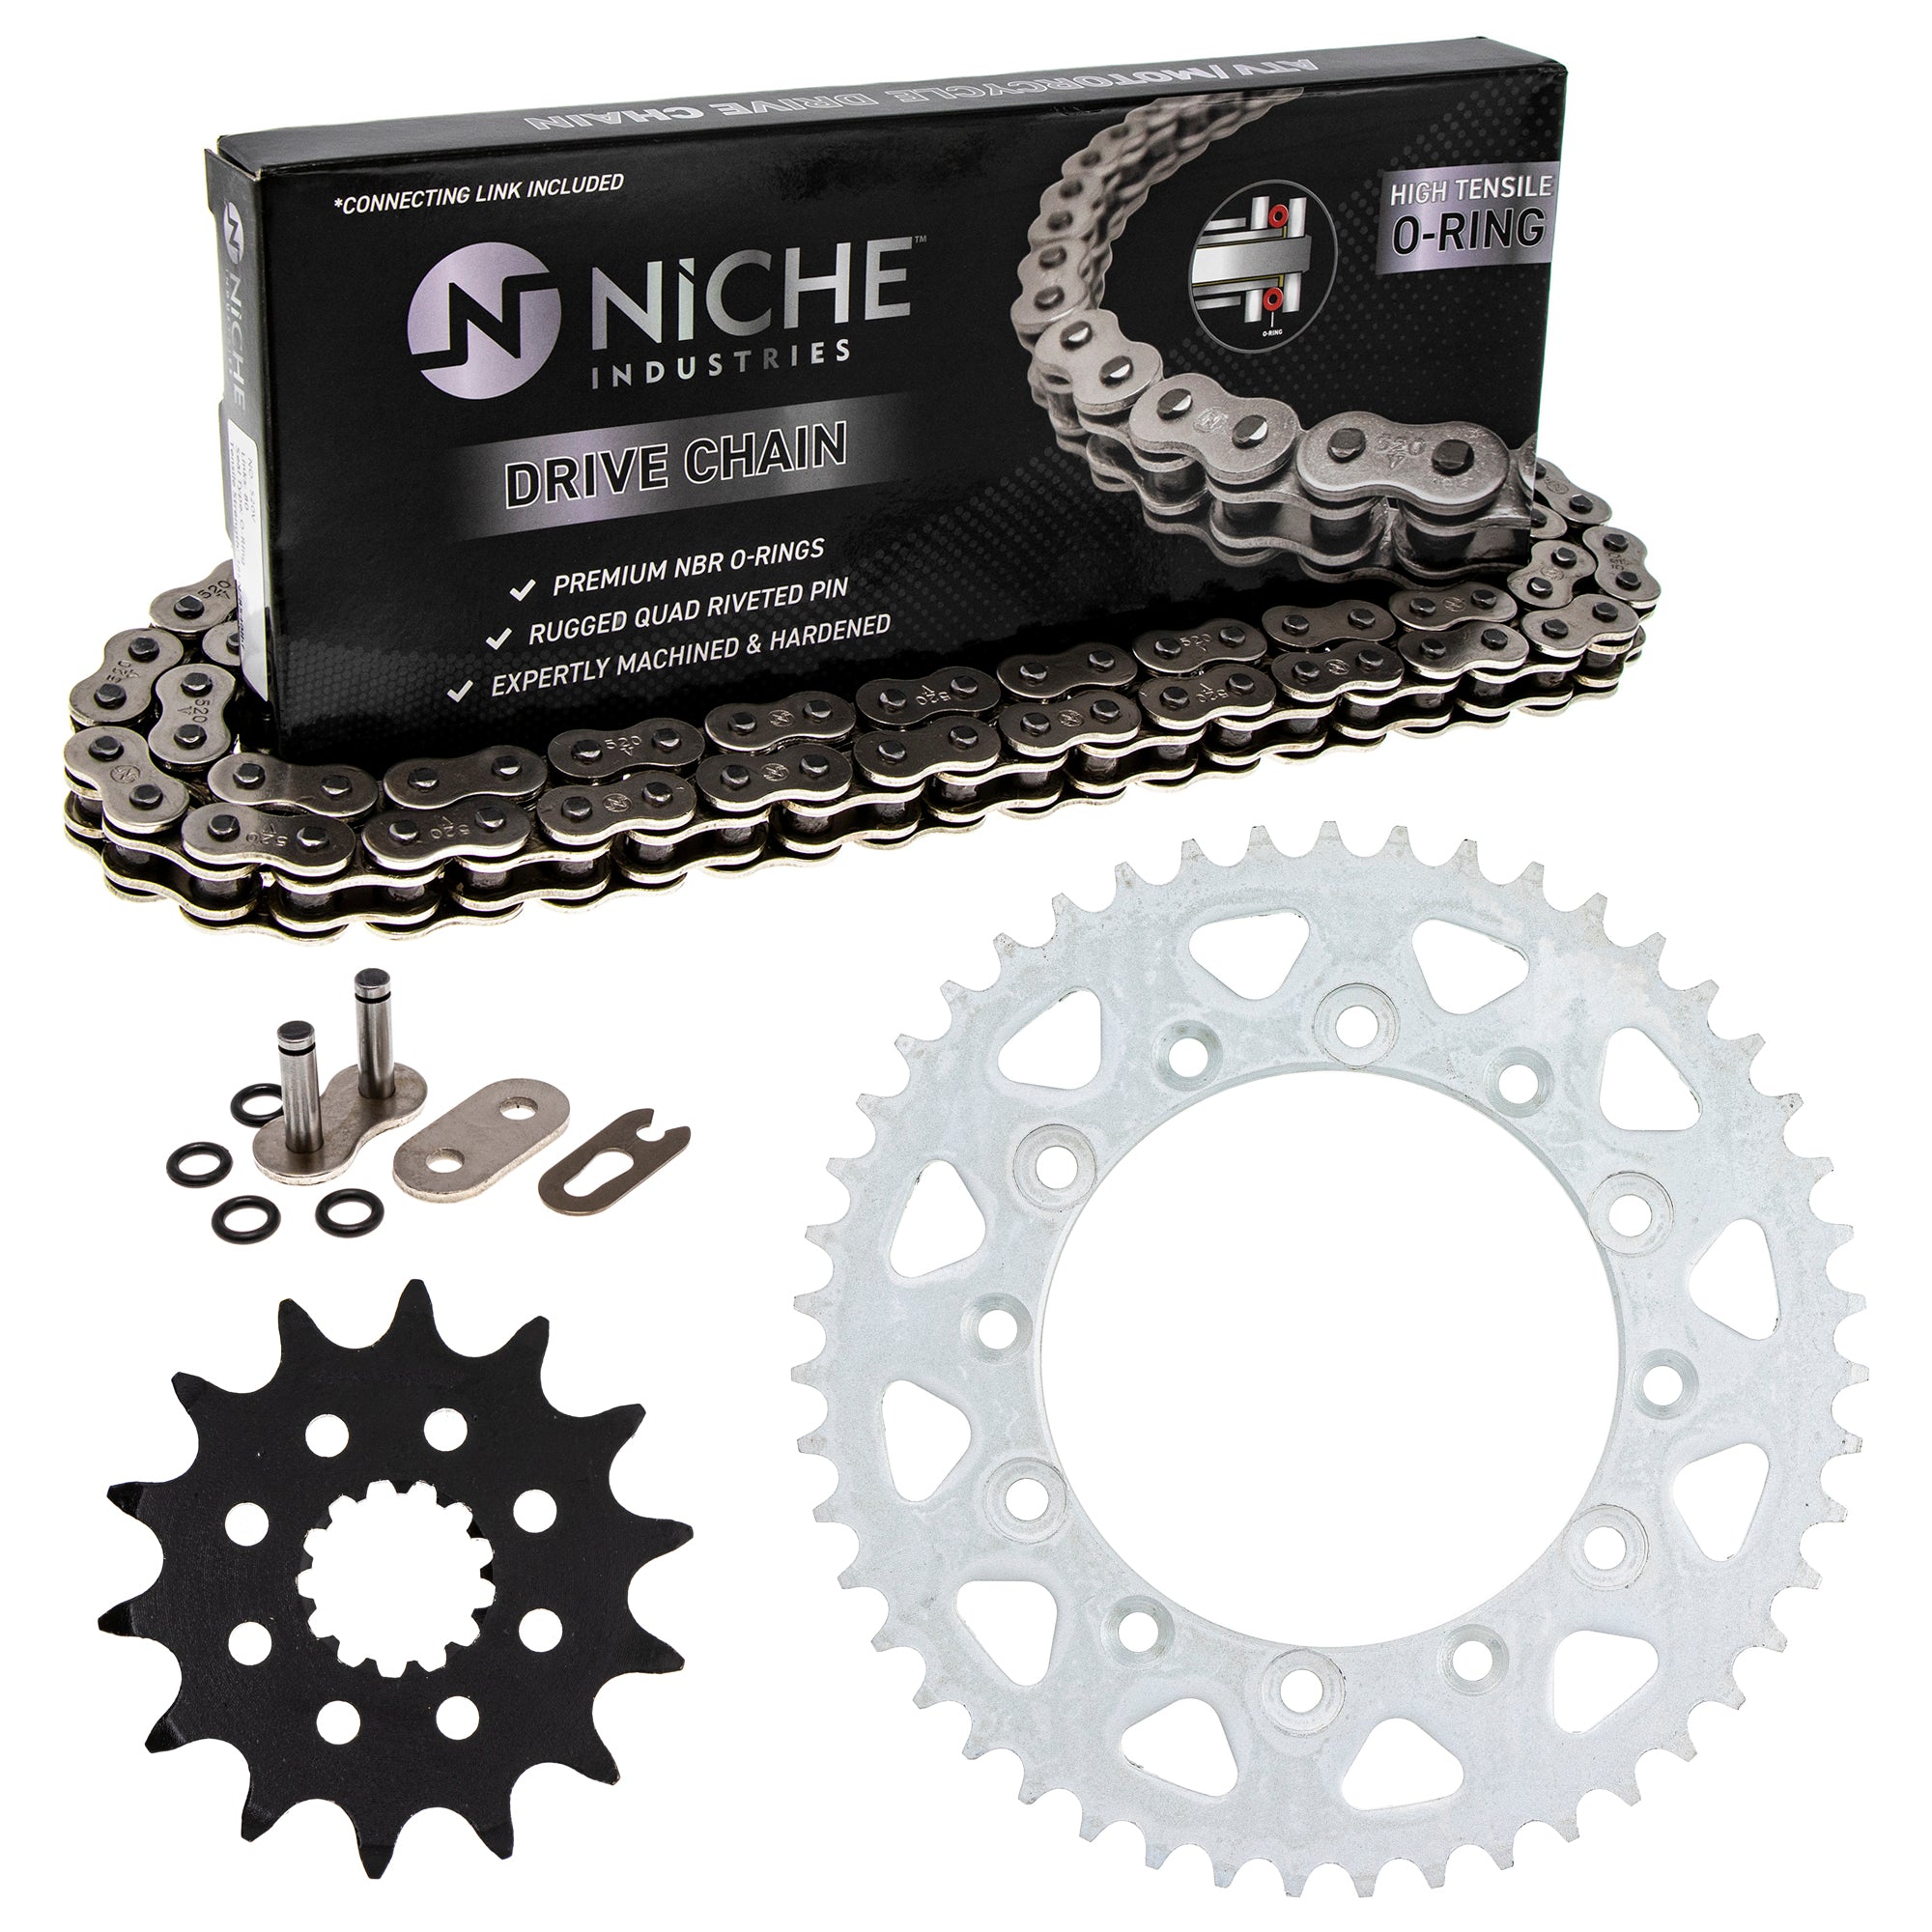 Drive Sprockets & Chain Kit for zOTHER Honda WR450F 94561-62114-00 27600-43D02-114 NICHE MK1004112